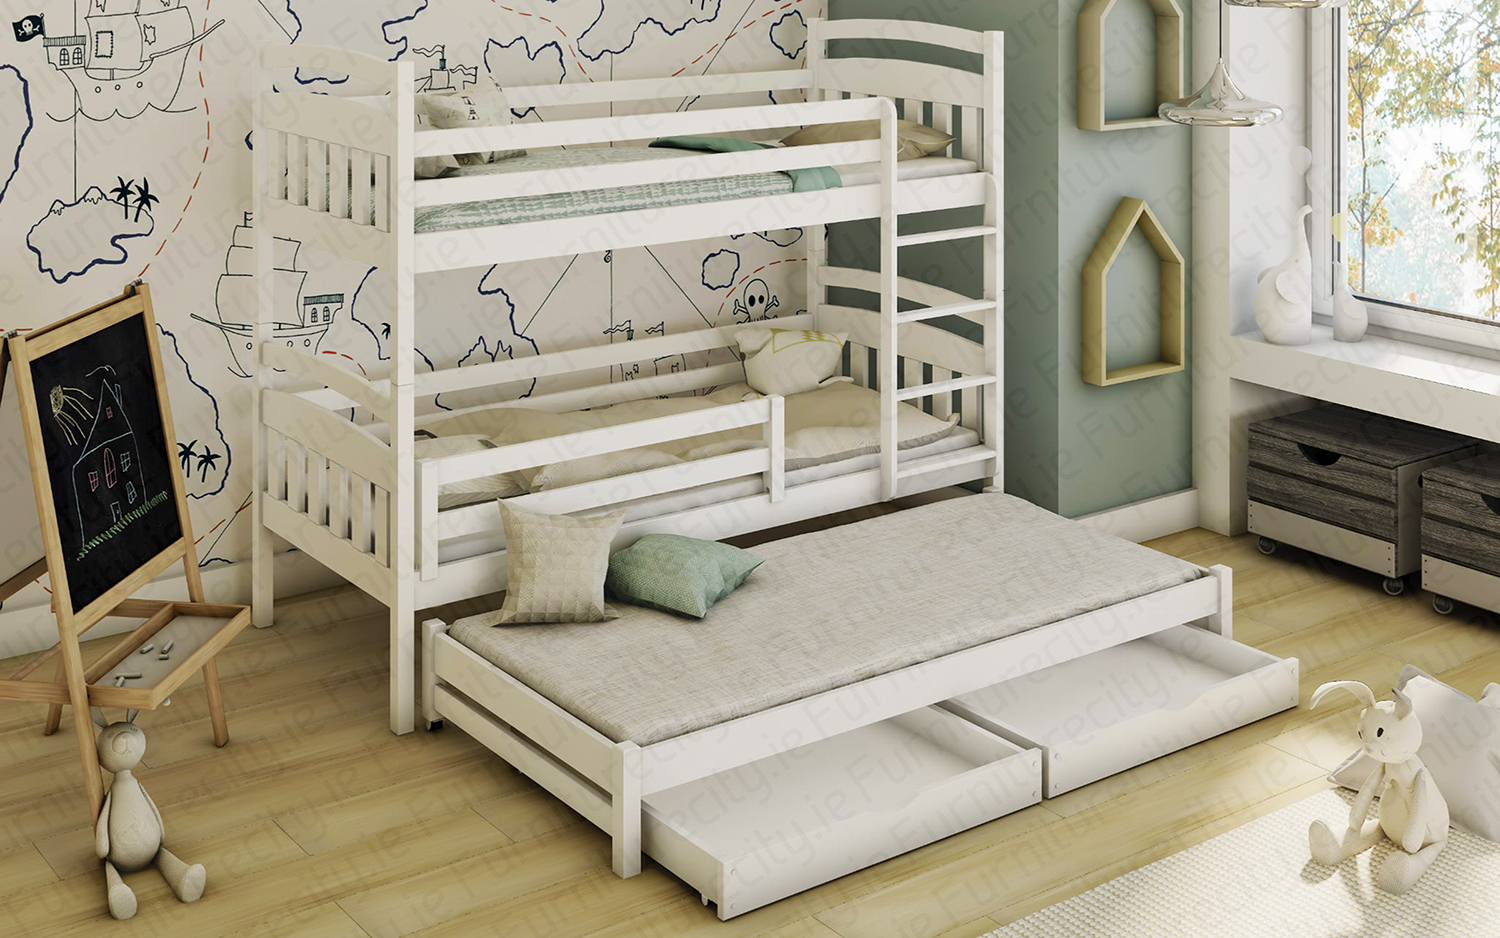 Bunk Bed Specialists Top Quality And, Bunk Beds With Two Beds On Top